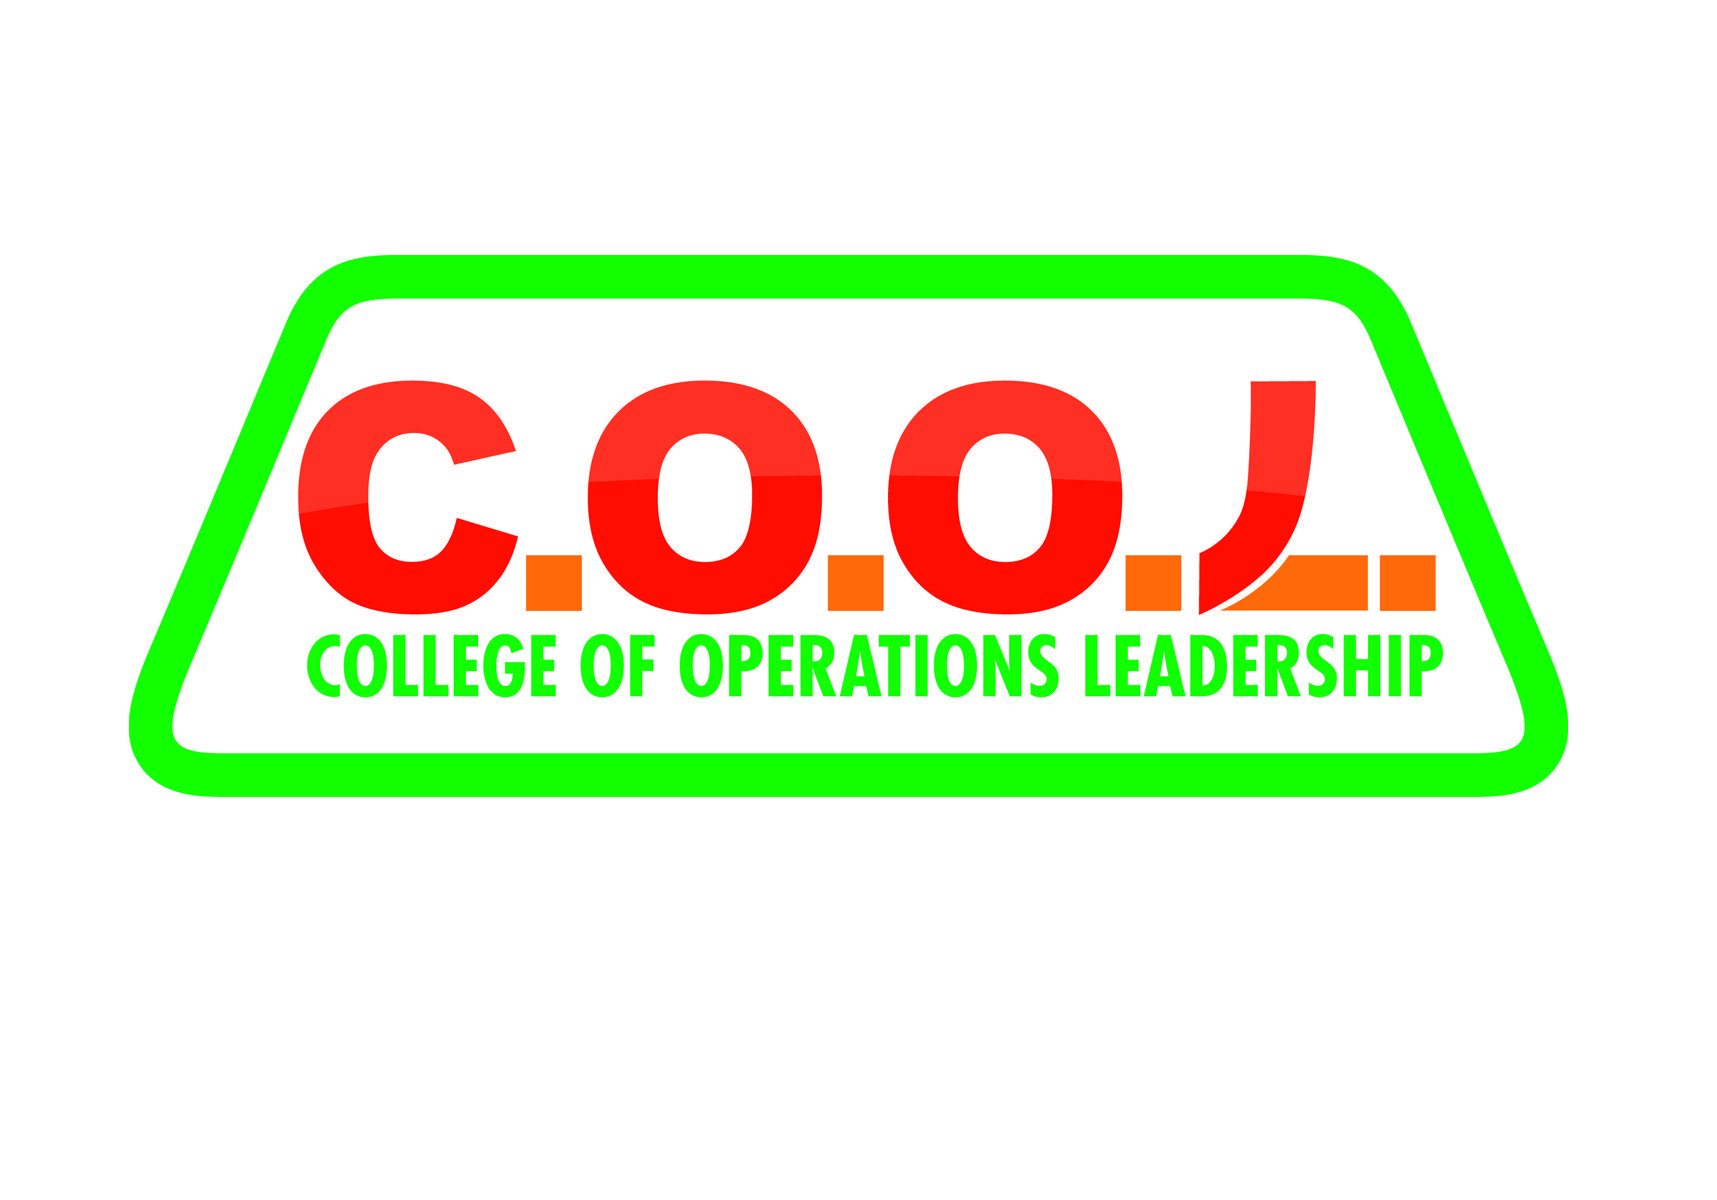 Cool College Logo - Logo Submission for 'C.O.O.L. College Of Operations Leadership